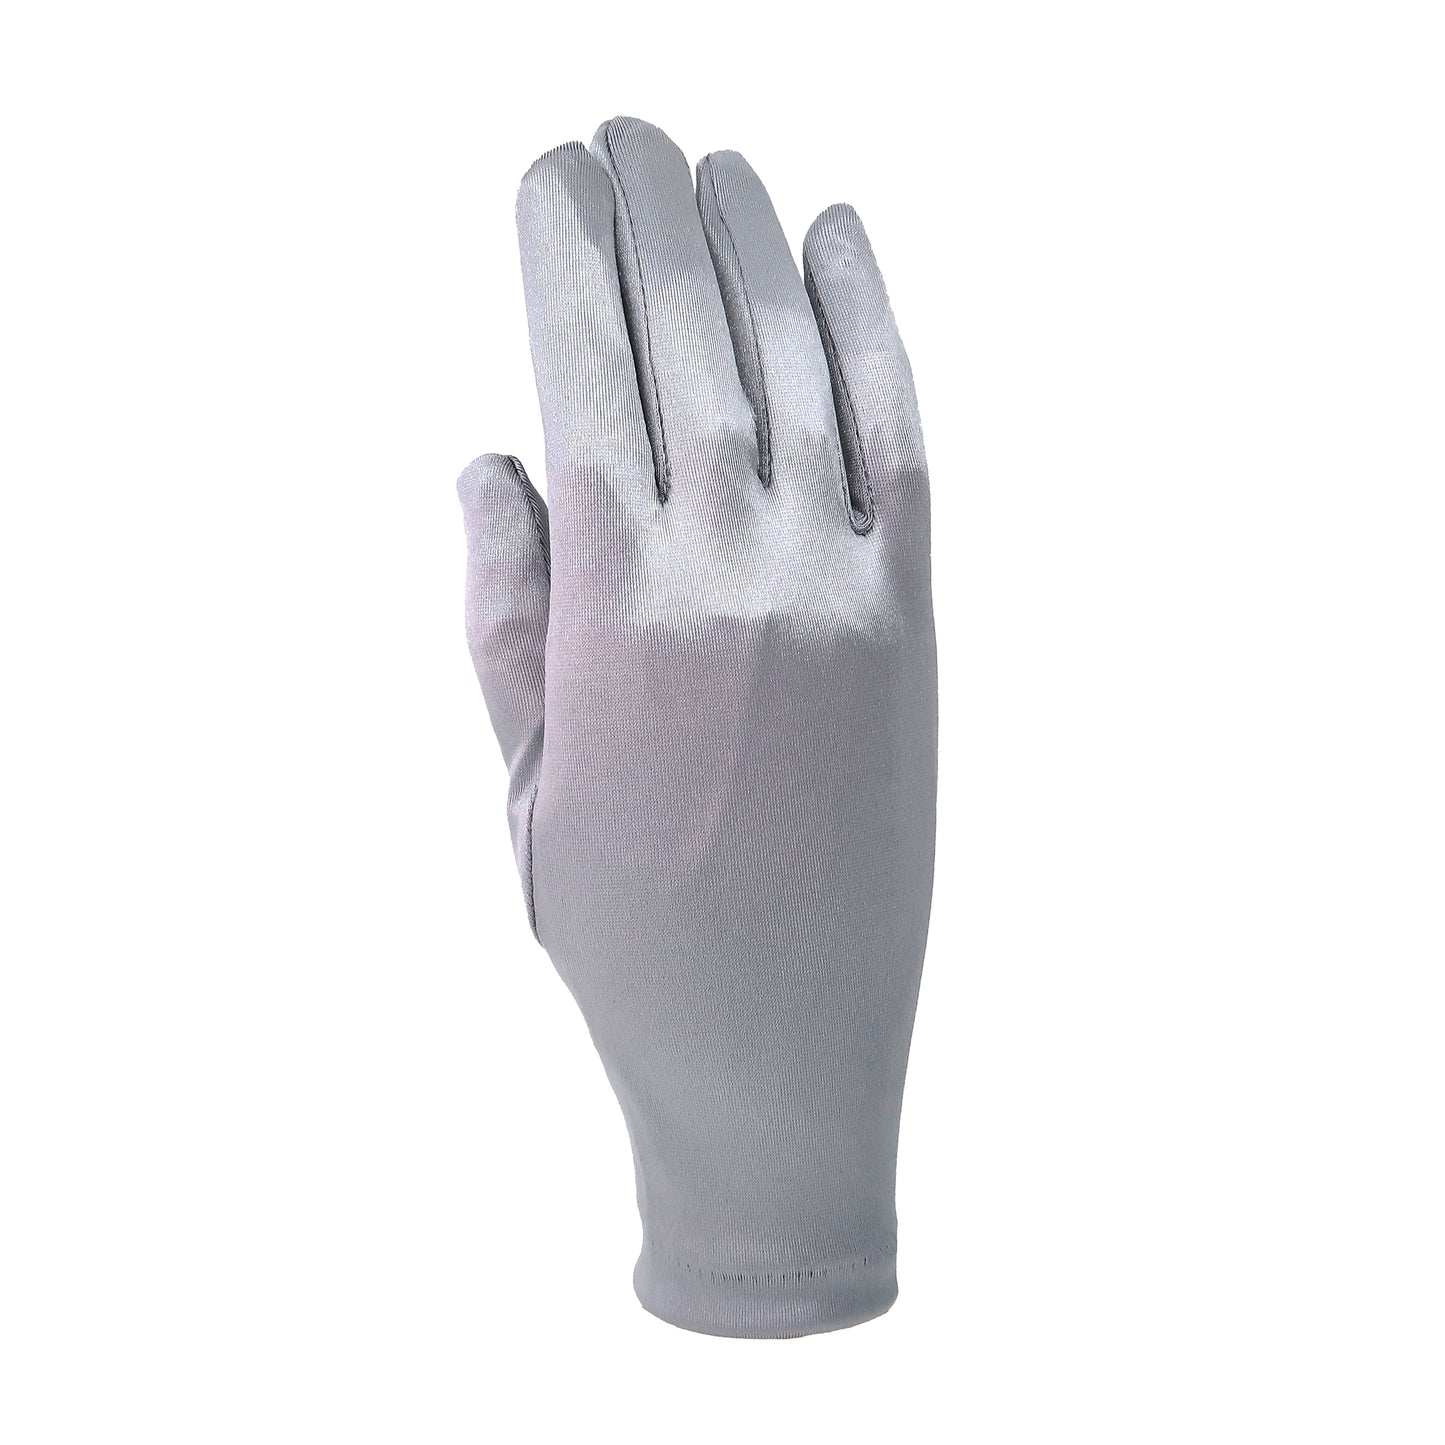 WEDDING AND SATIN GLOVES 528-2BL (12PC)